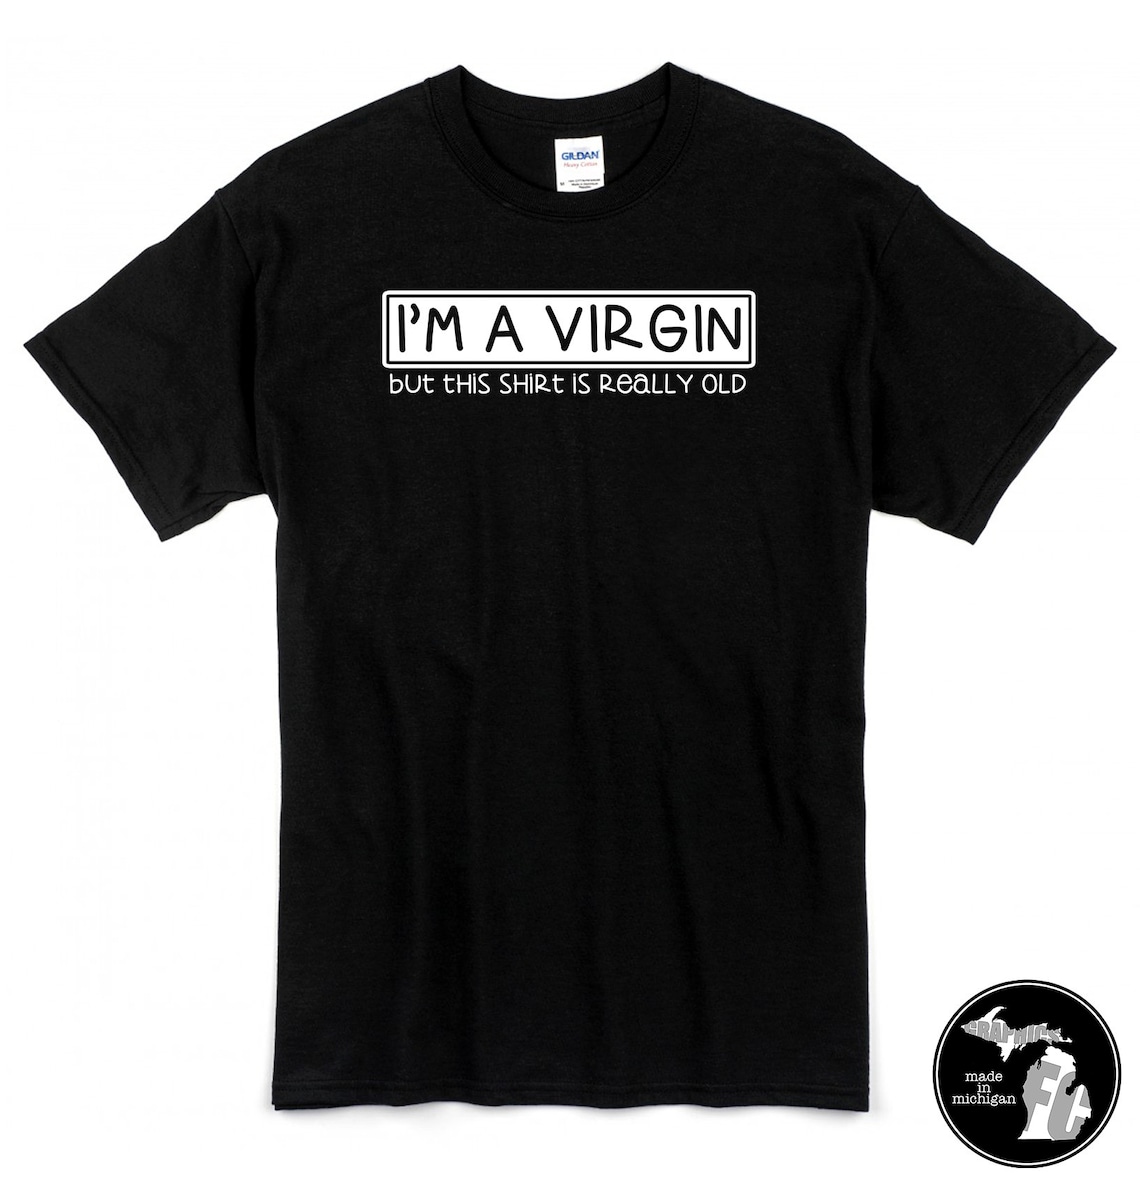 I'm a Virgin Tee Shirt MADE TO ORDER Customize Colors | Etsy